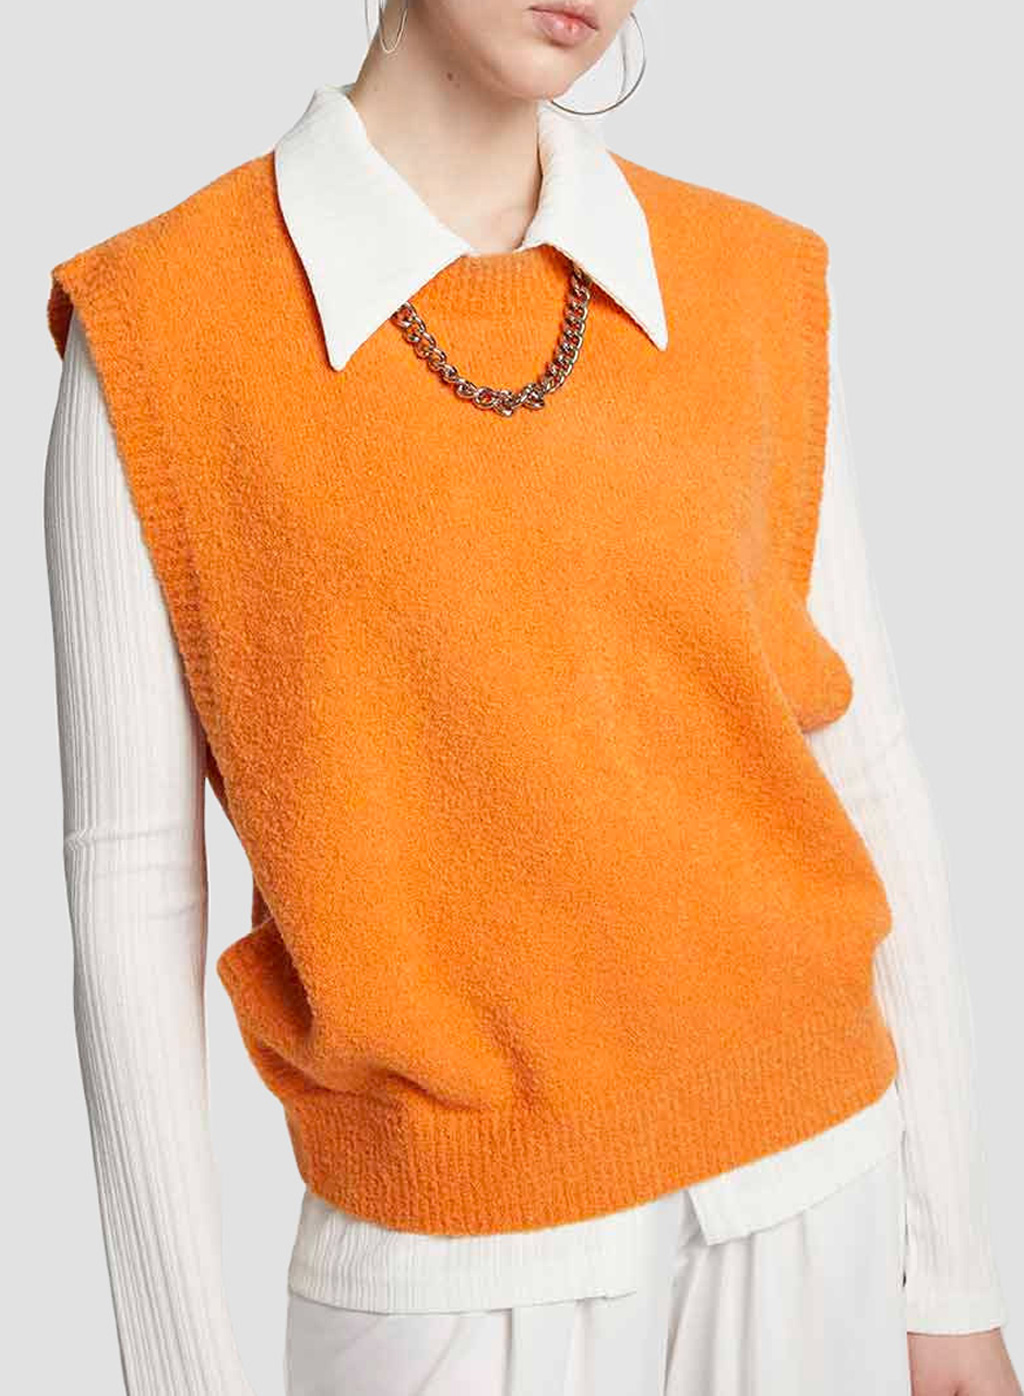 Nap Loungewear: Casual Knitted Vest $39